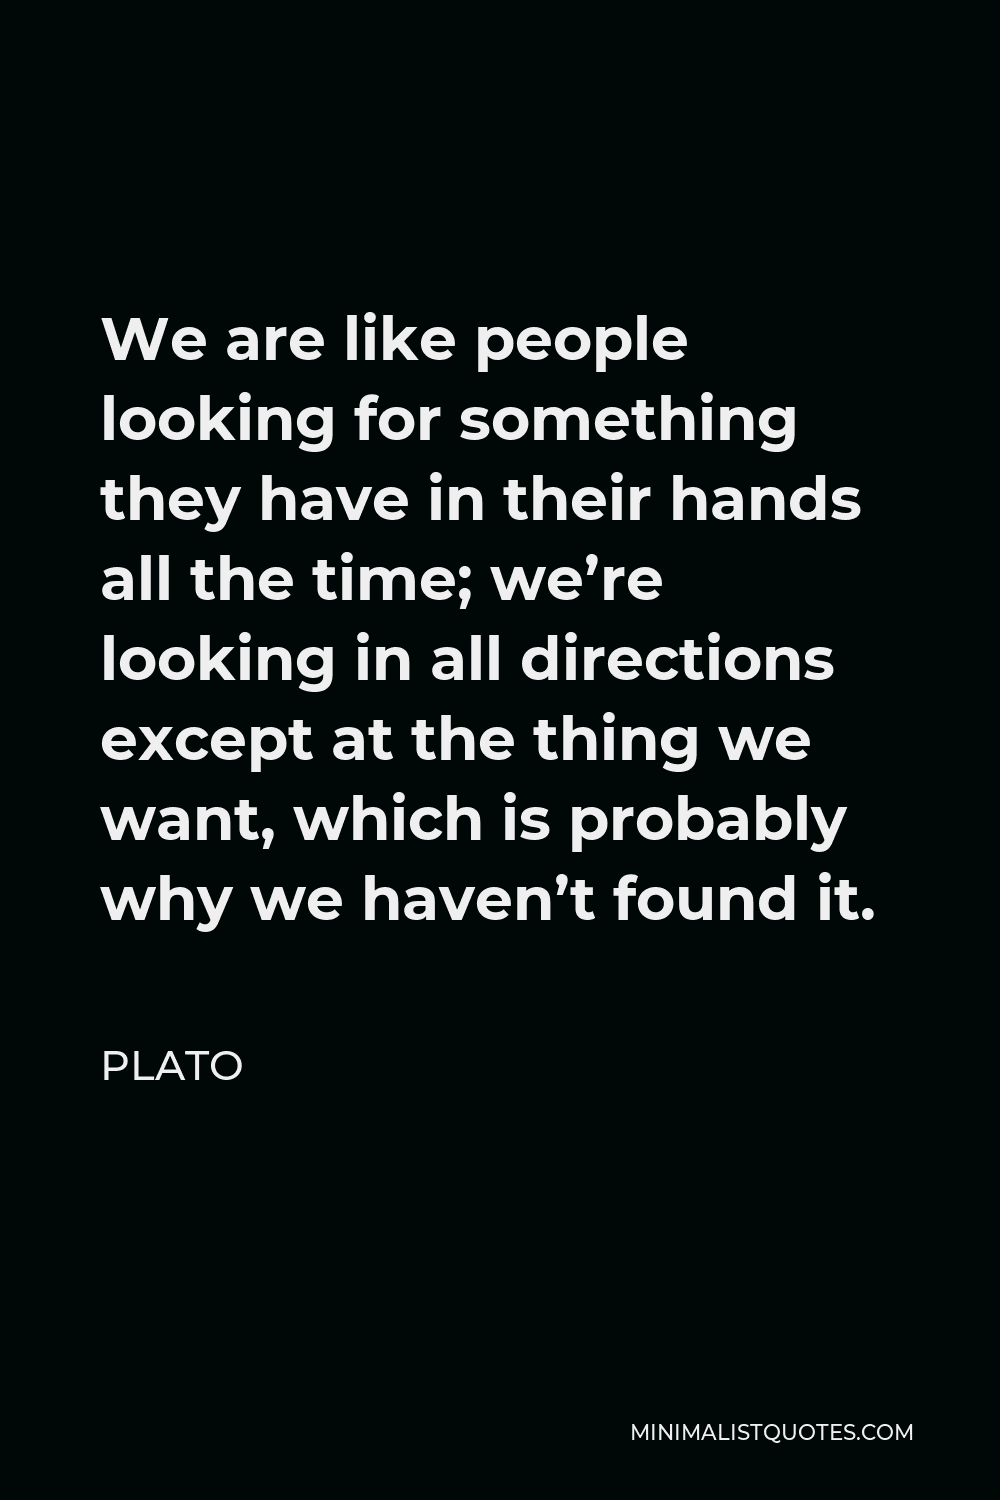 Plato Quote: We are like people looking for something they have in their hands all the time; we're looking in all directions except at the thing we want, which is probably why we haven't found it.